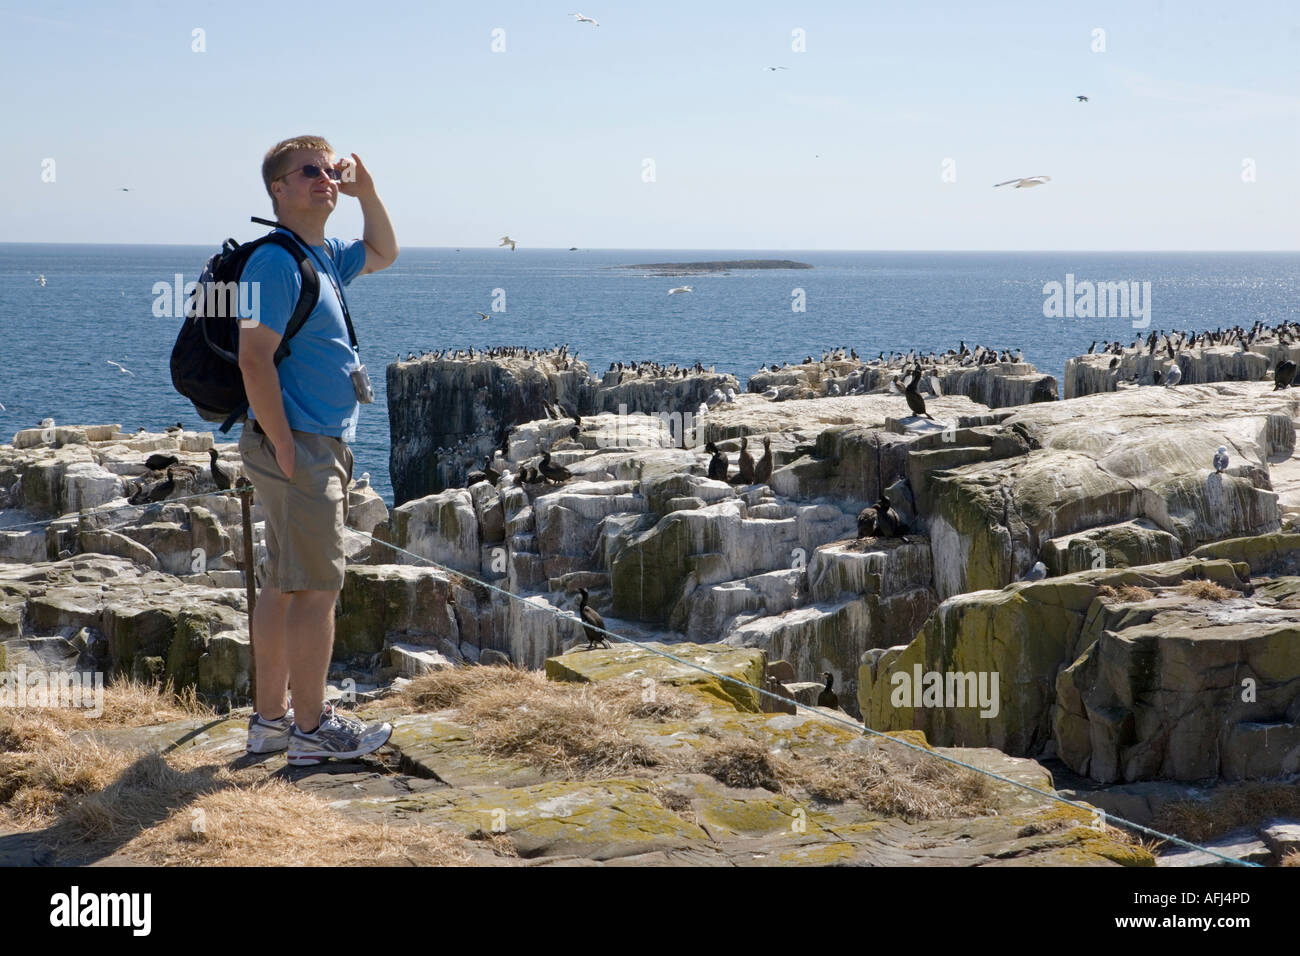 Tourist views the nesting birds in colonies on Staple Island, the farnes off Northumberland Coast, England Stock Photo